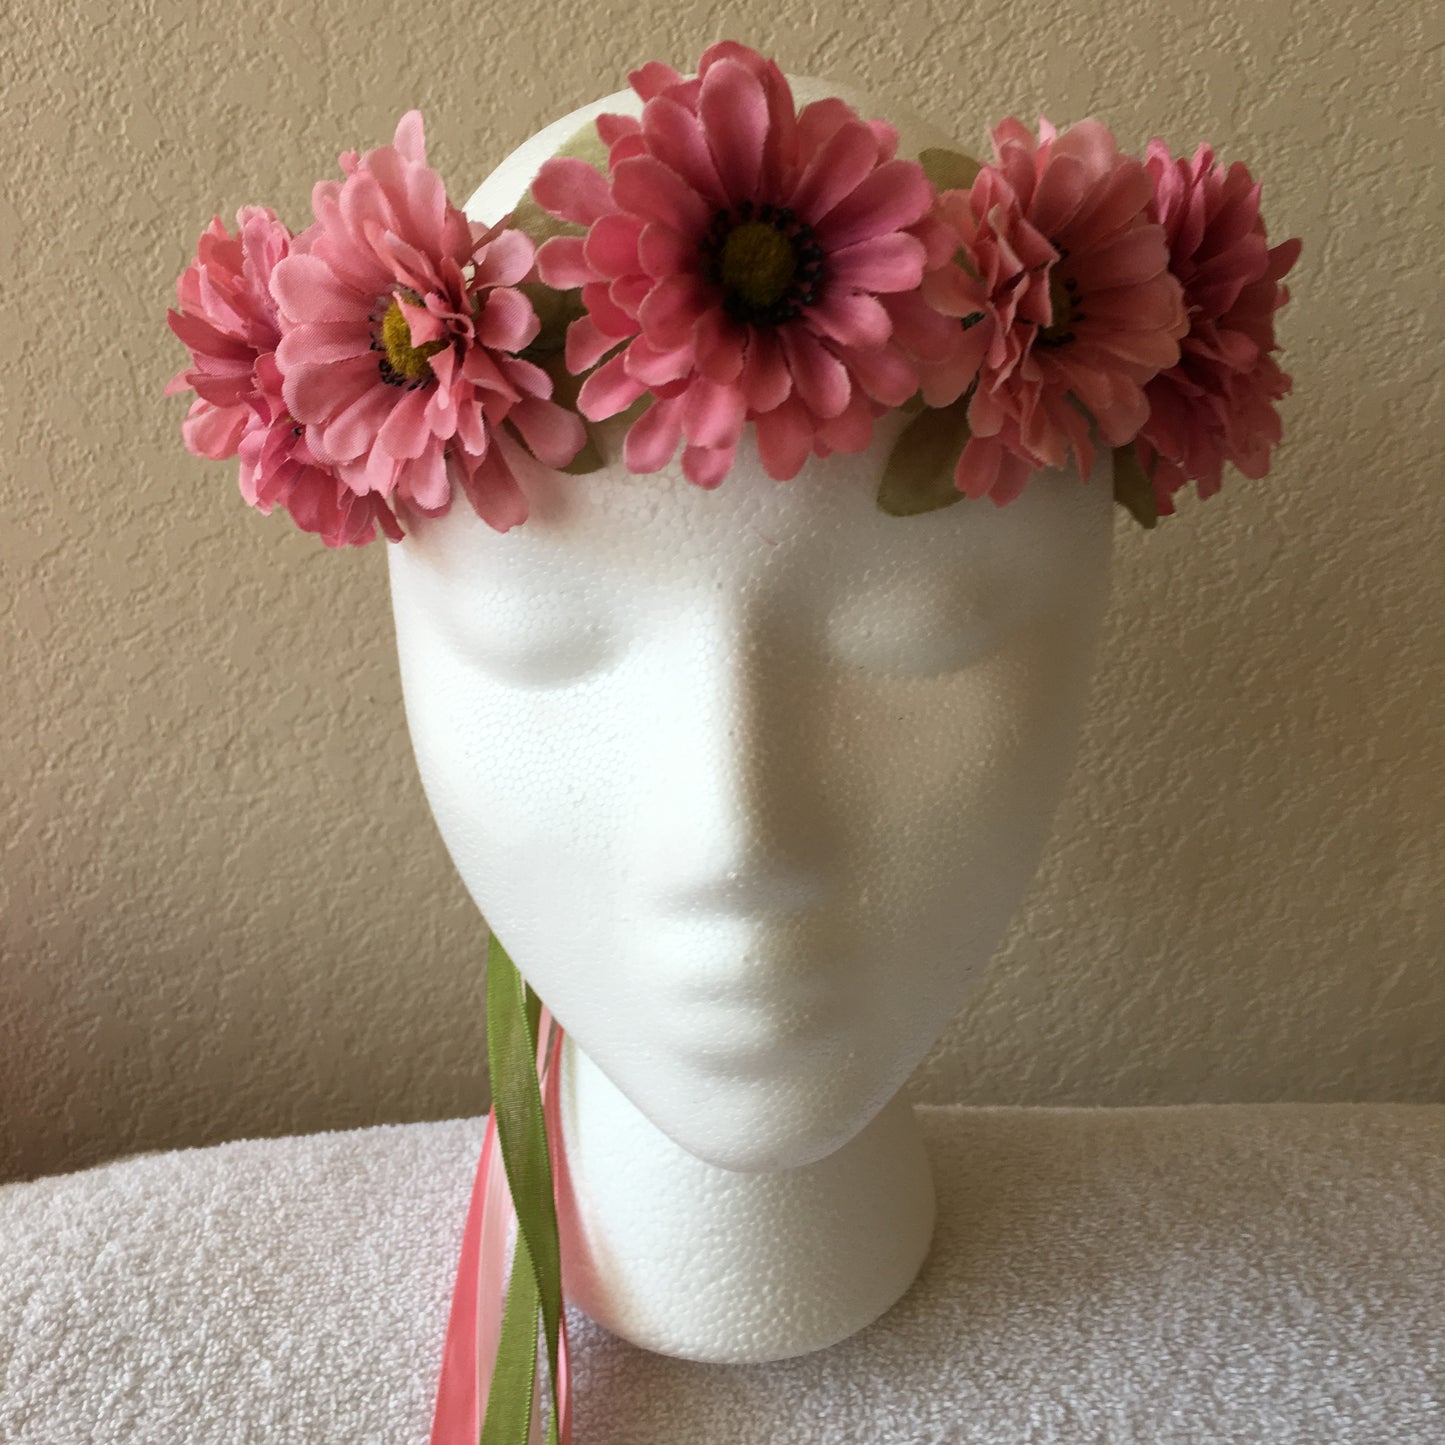 Small Wreath - All pink daisies